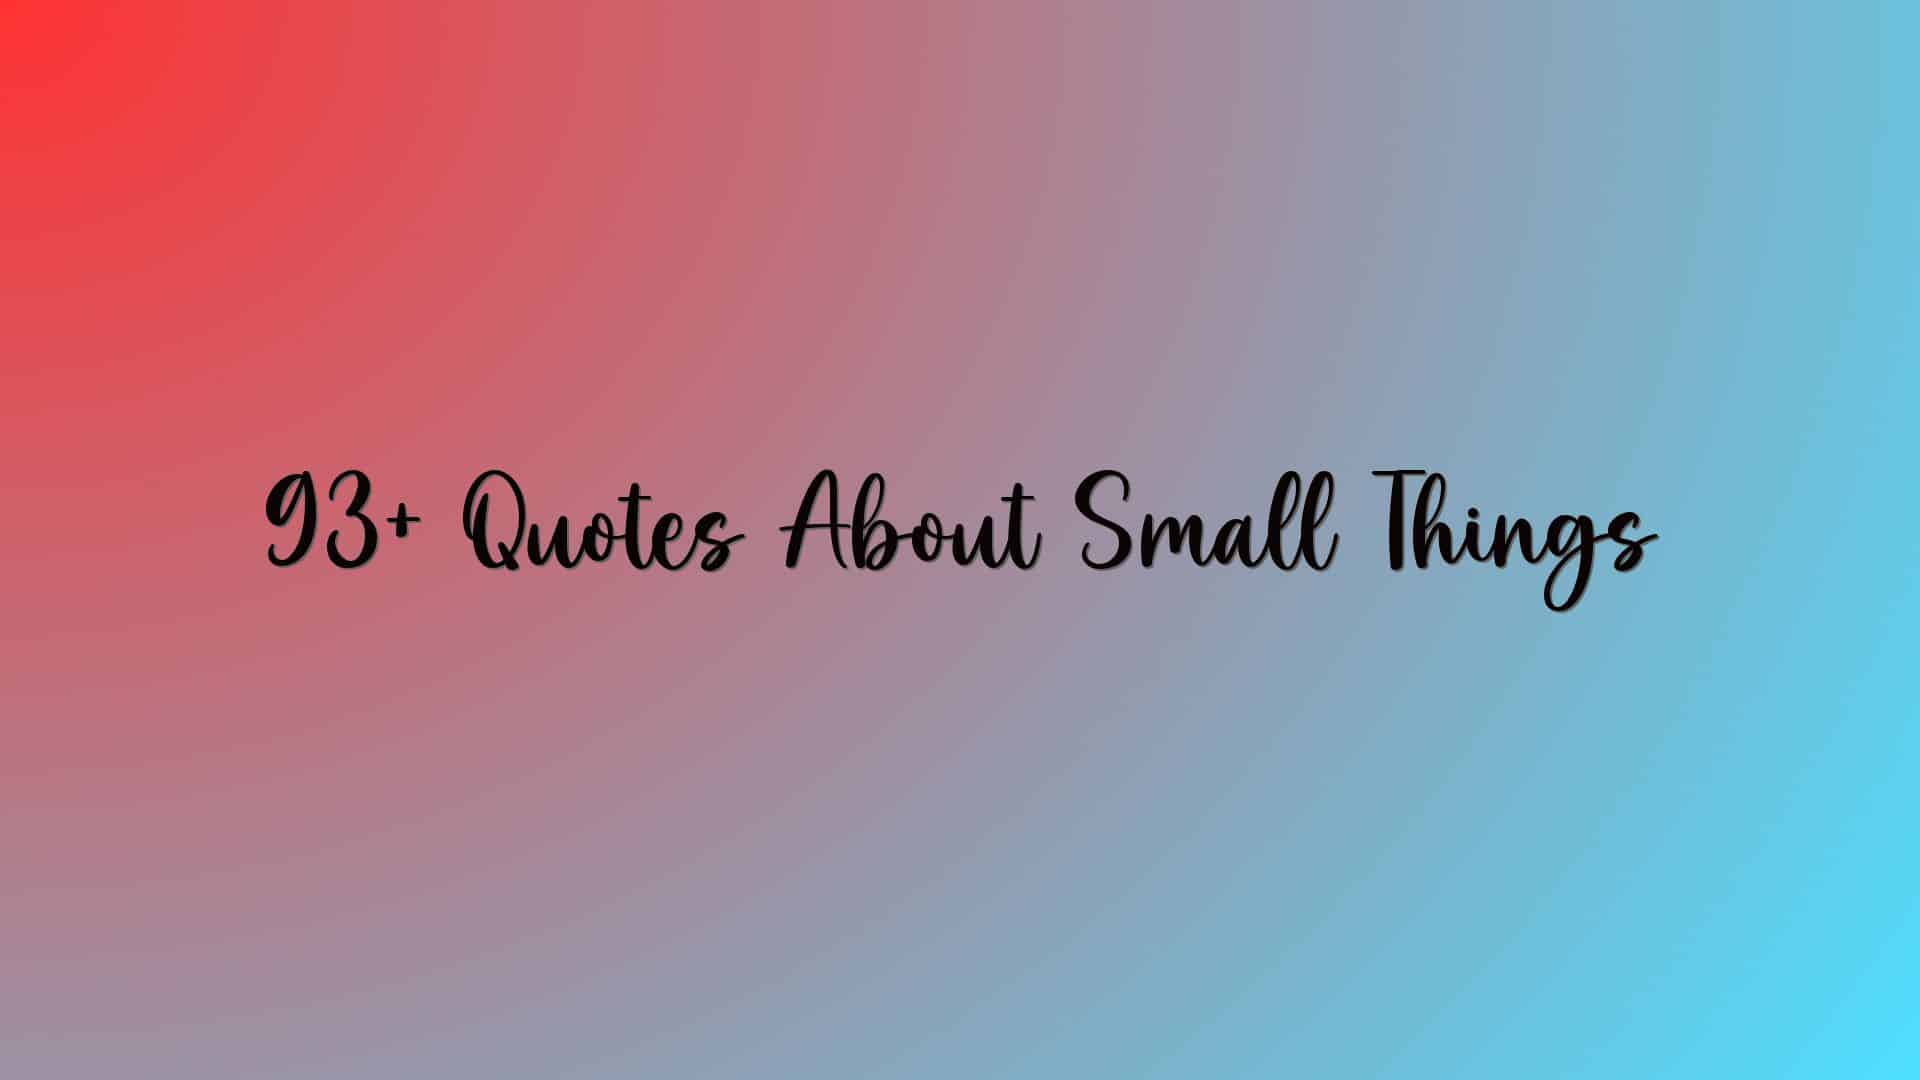 93+ Quotes About Small Things